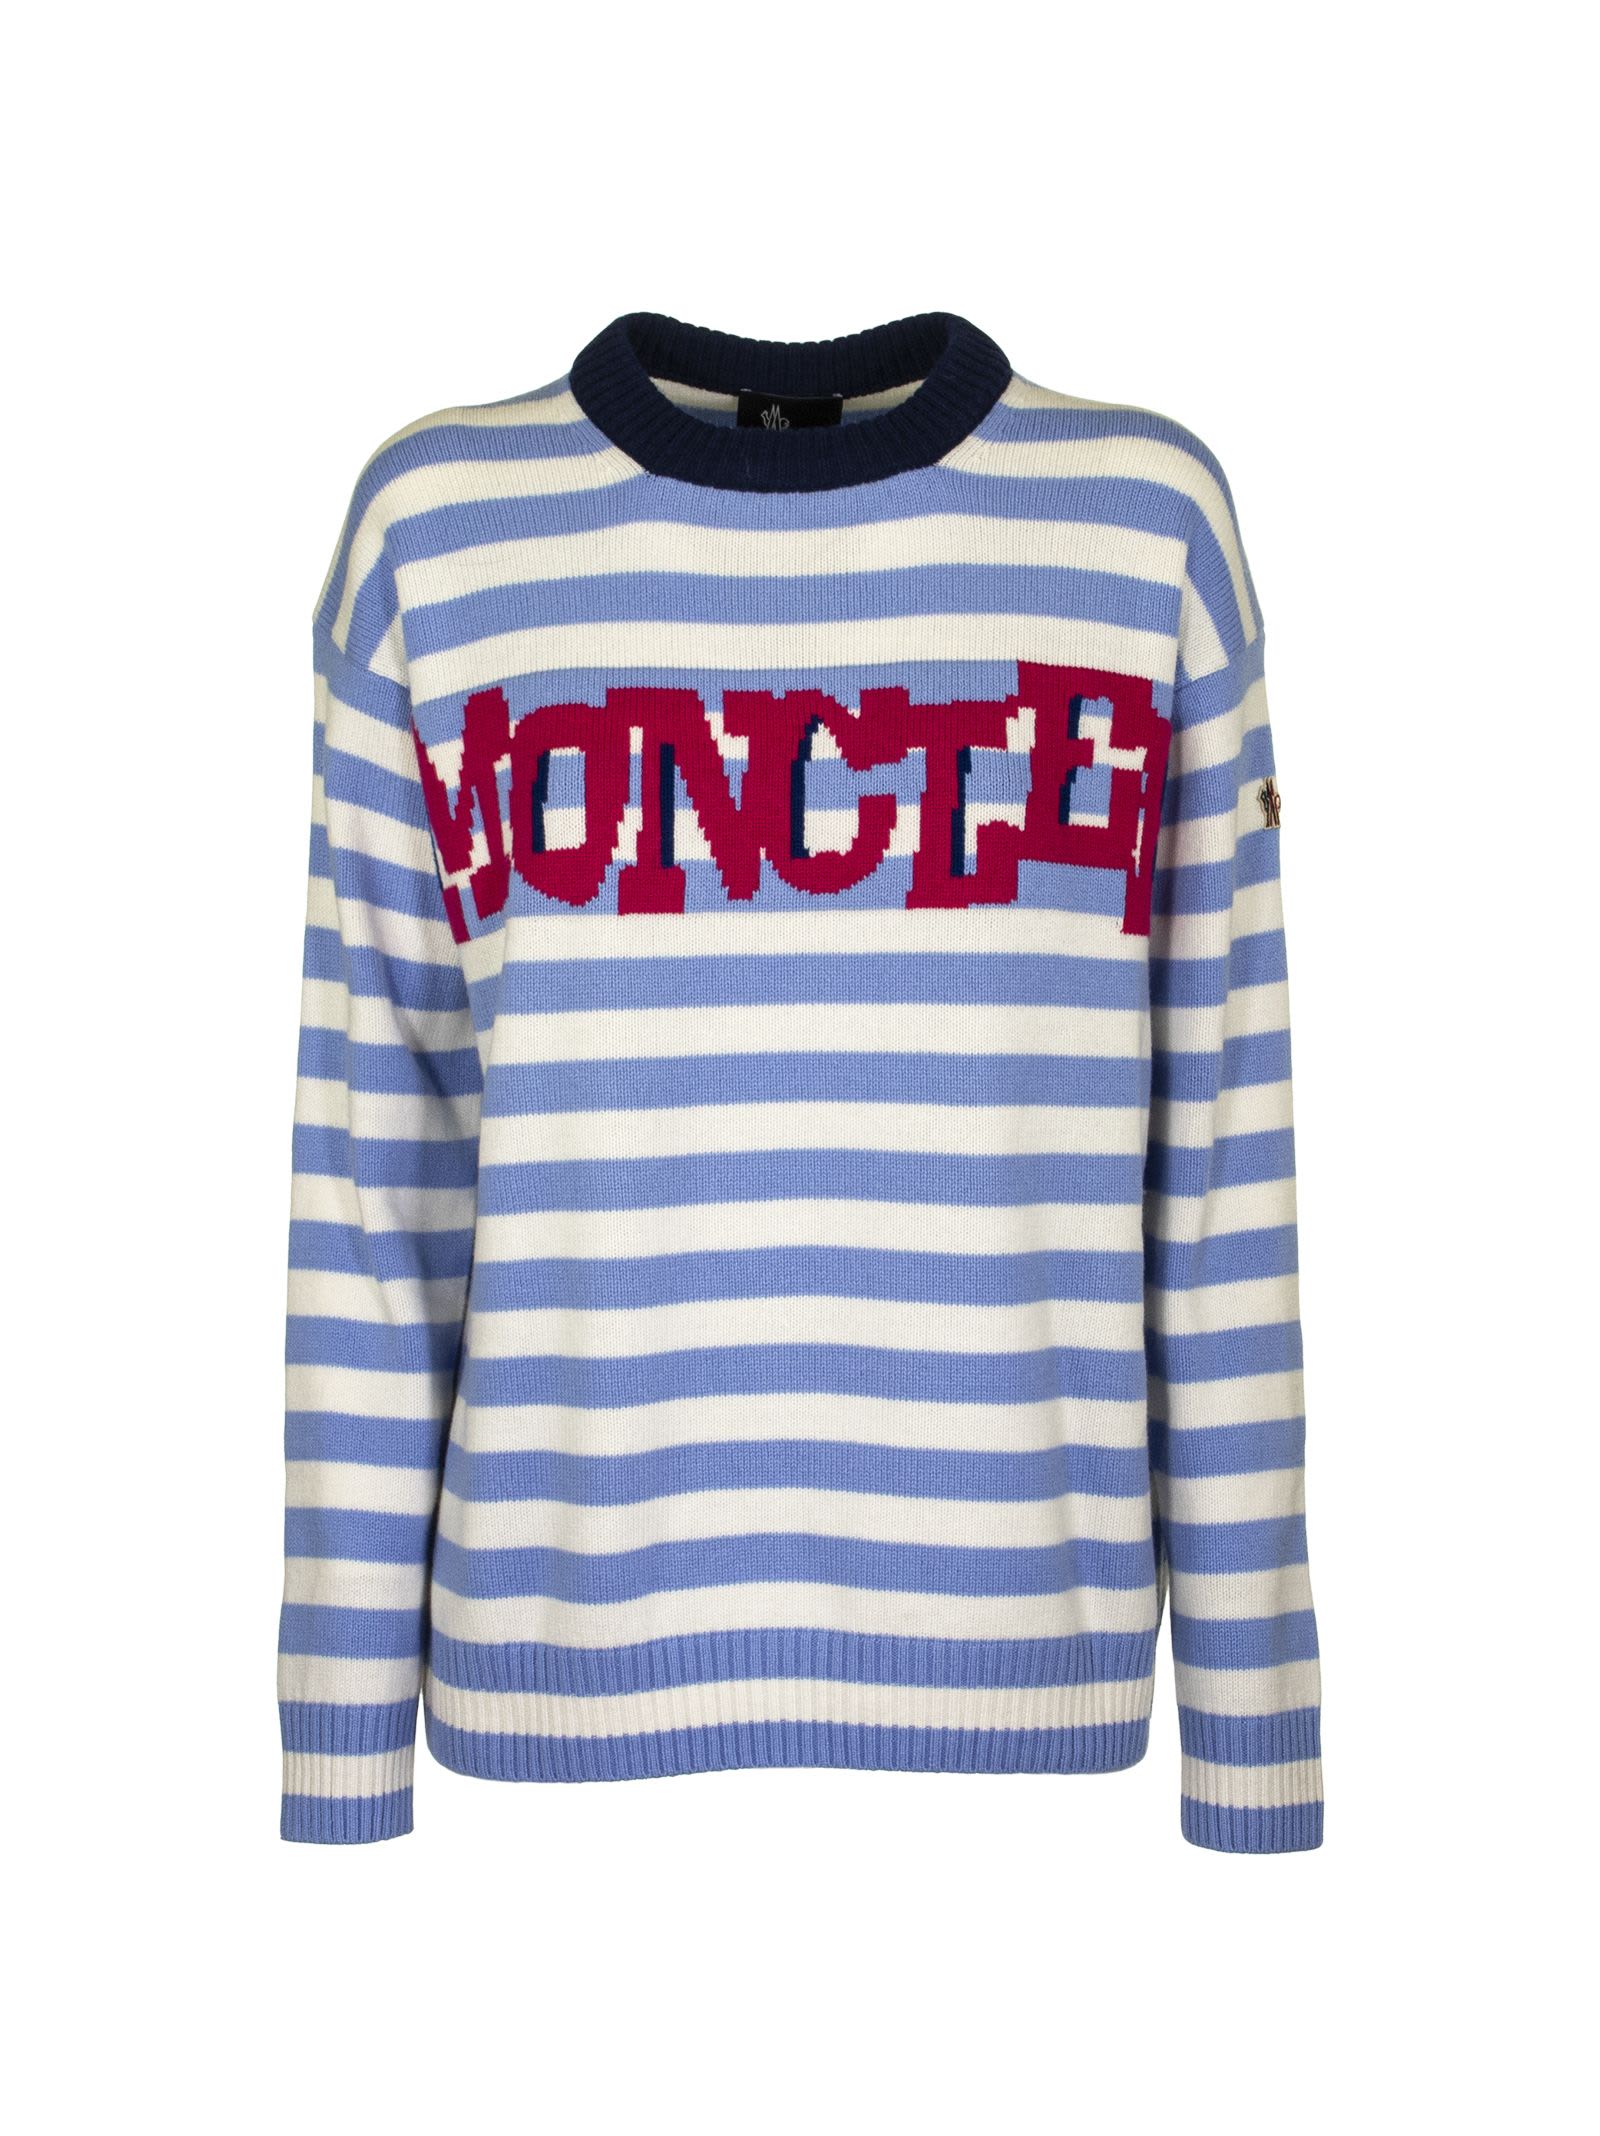 MONCLER CREW NECK KNIT SWEATER WOOL AND CASHMERE,11121520